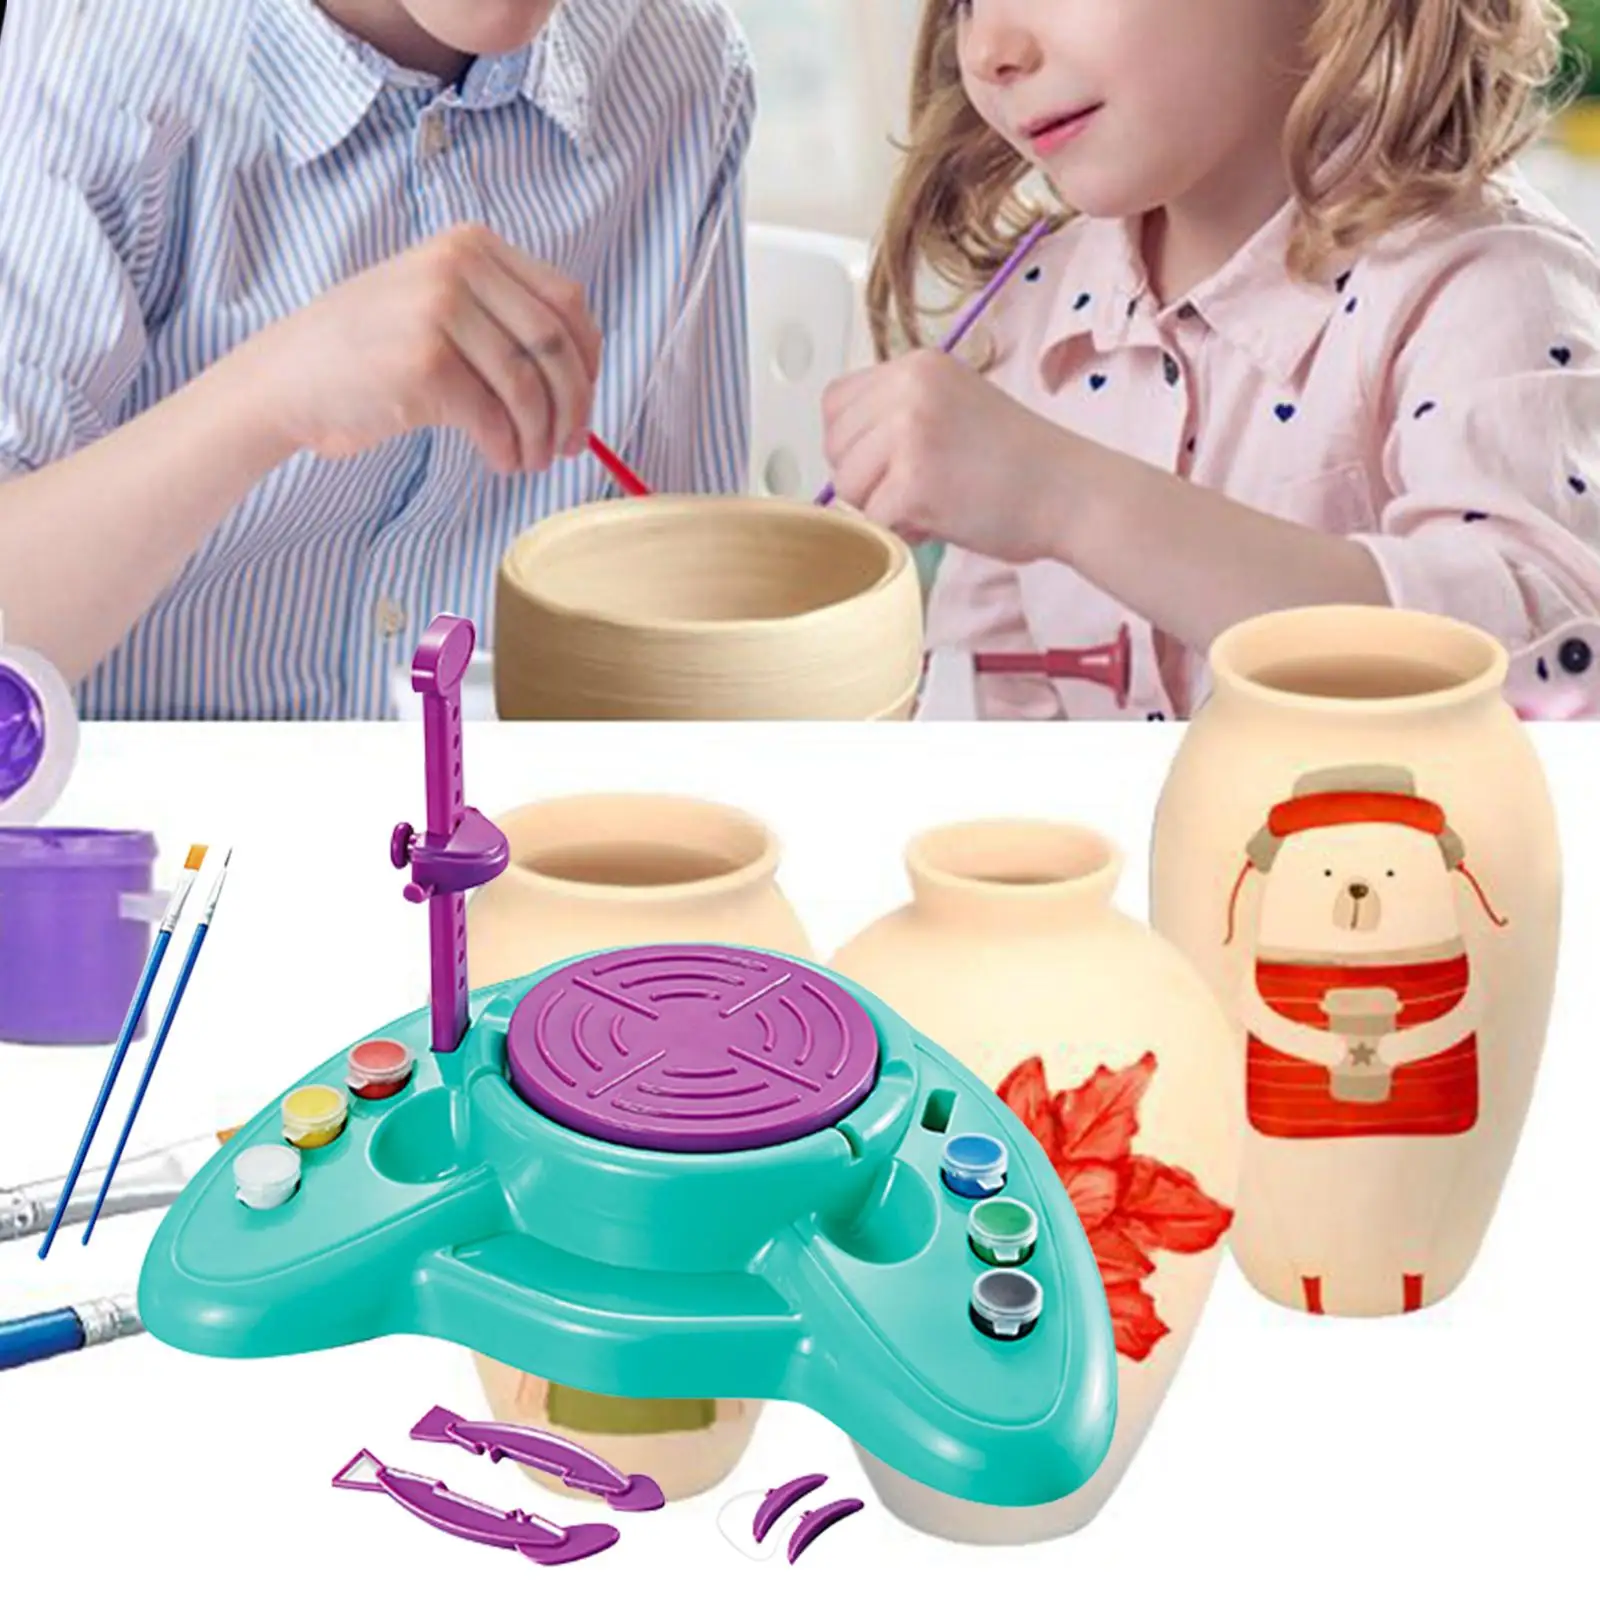 Electric Ceramic Machine Educational Toy Mini Craft Ceramic Clay Pottery Kit for Ceramic Work clay Crafts Beginners Girls